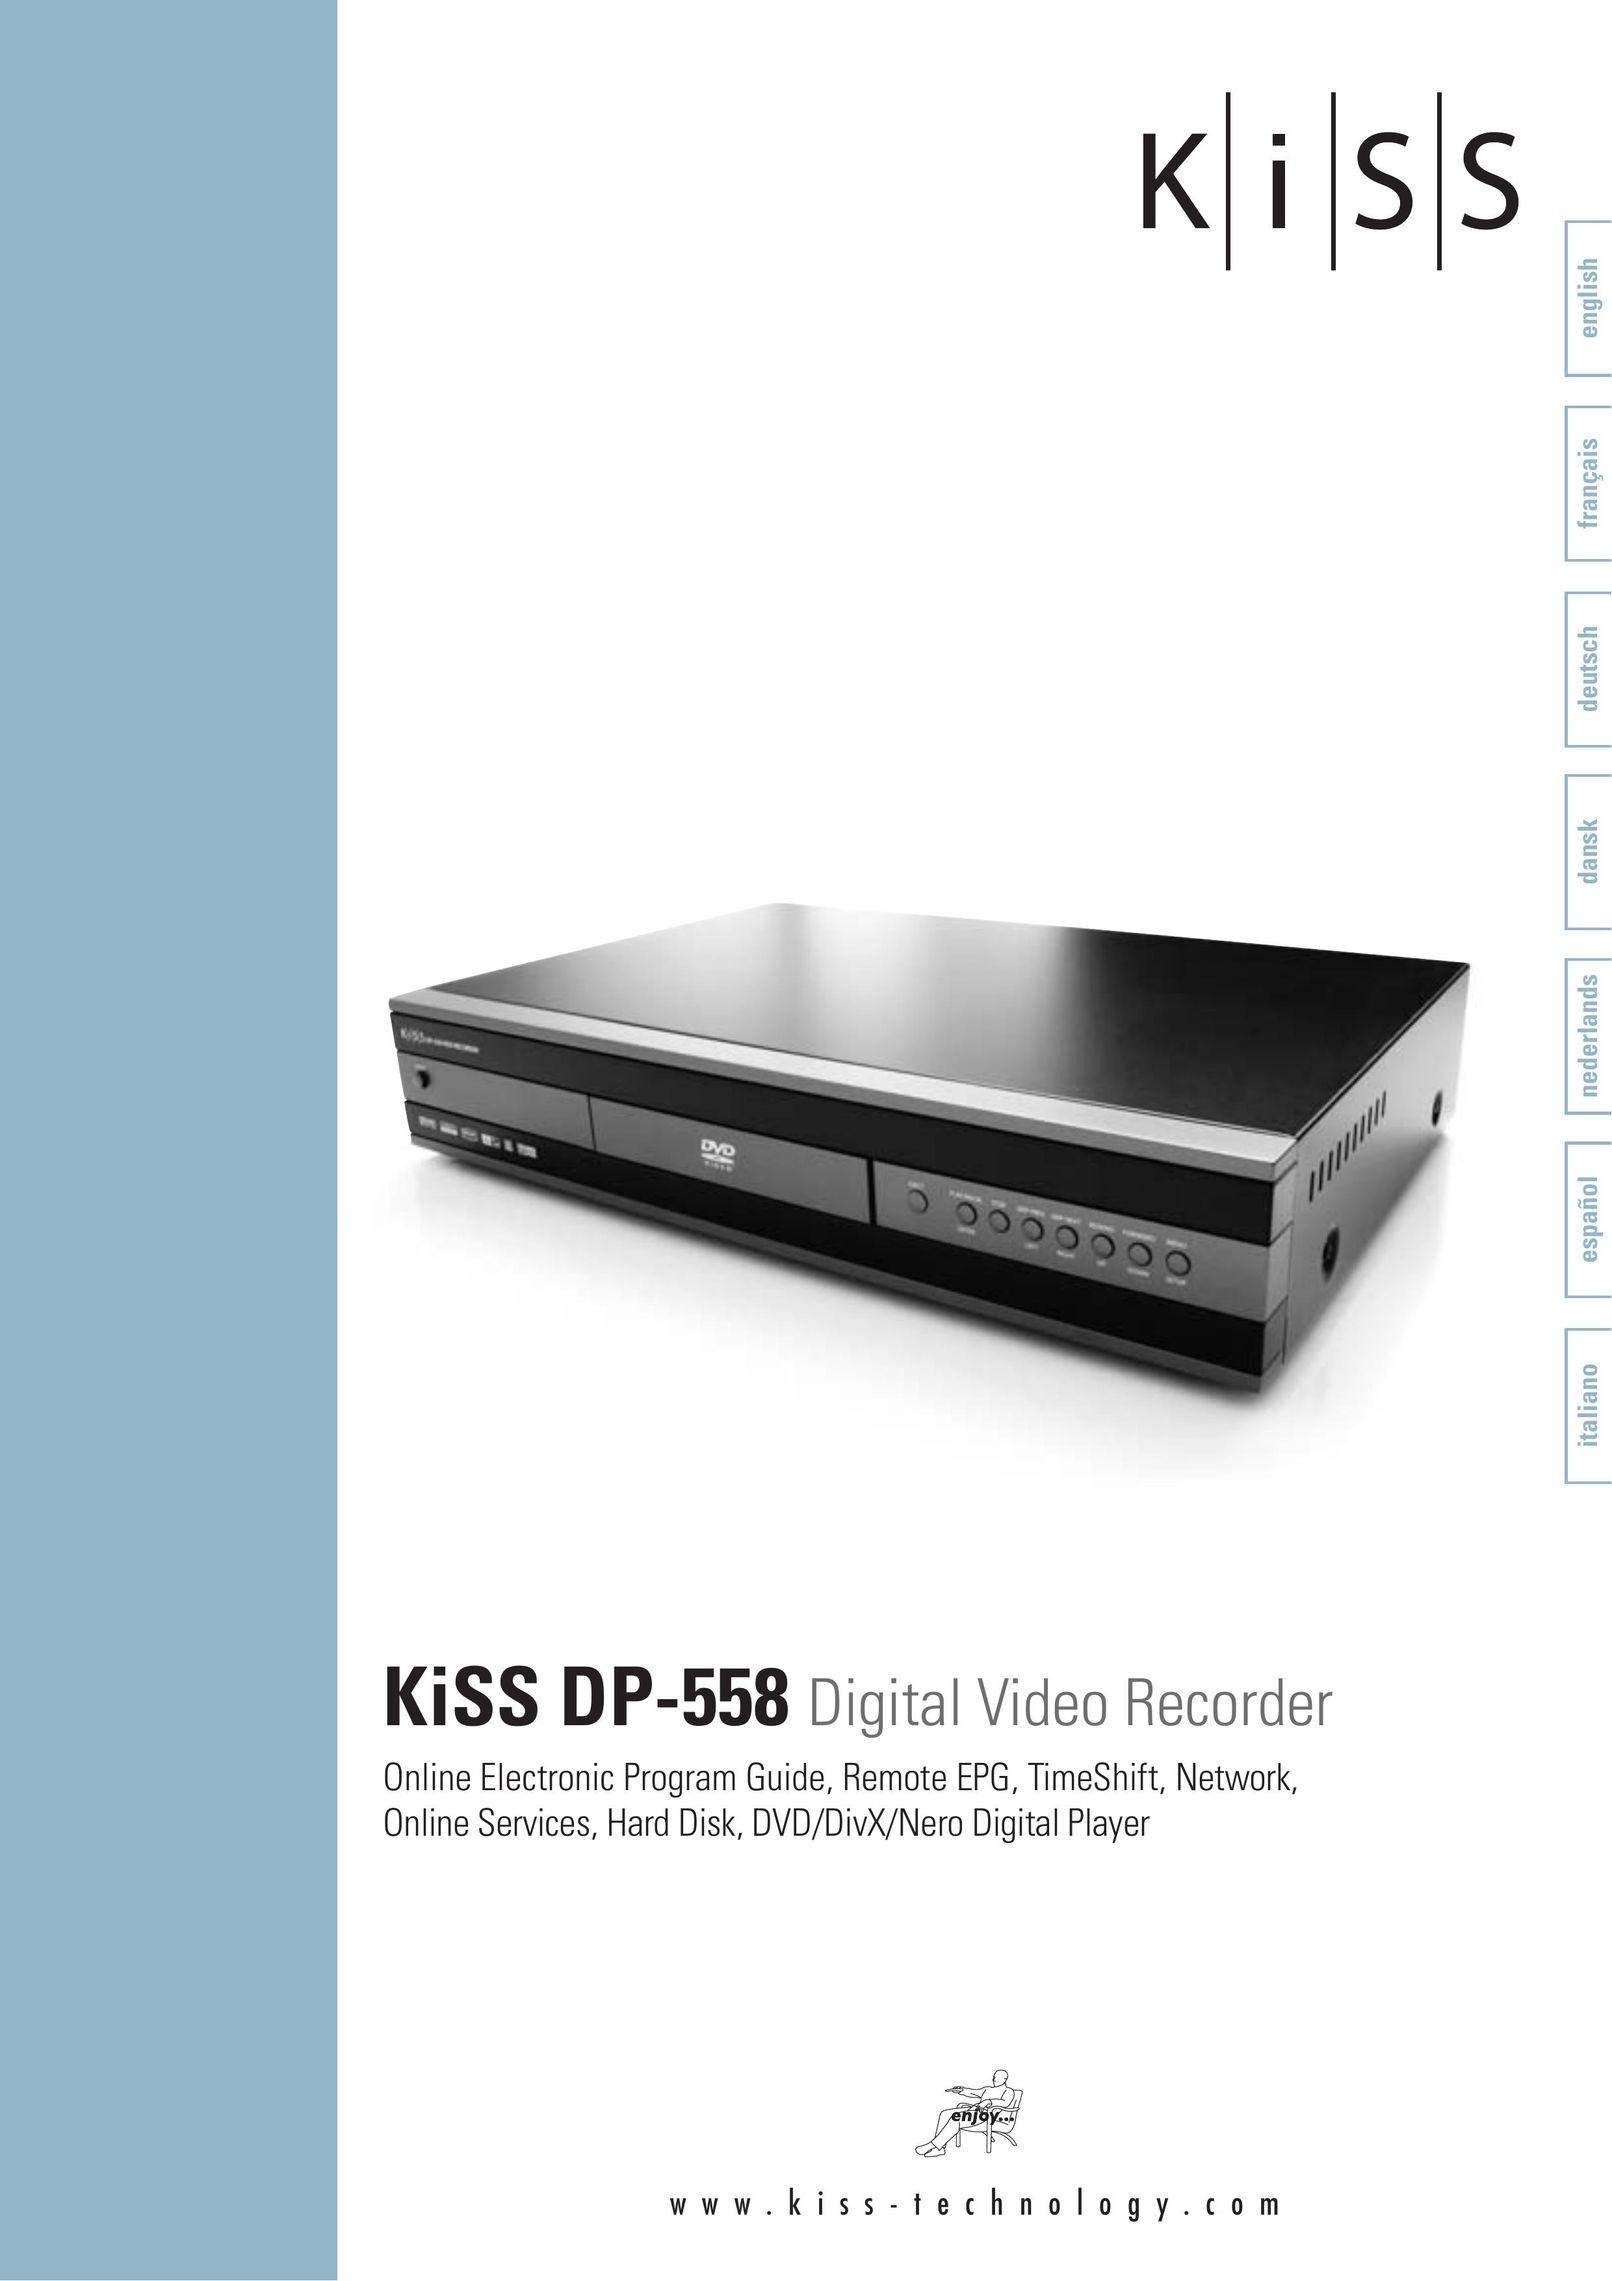 KiSS Networked Entertainment DP-558 DVR User Manual